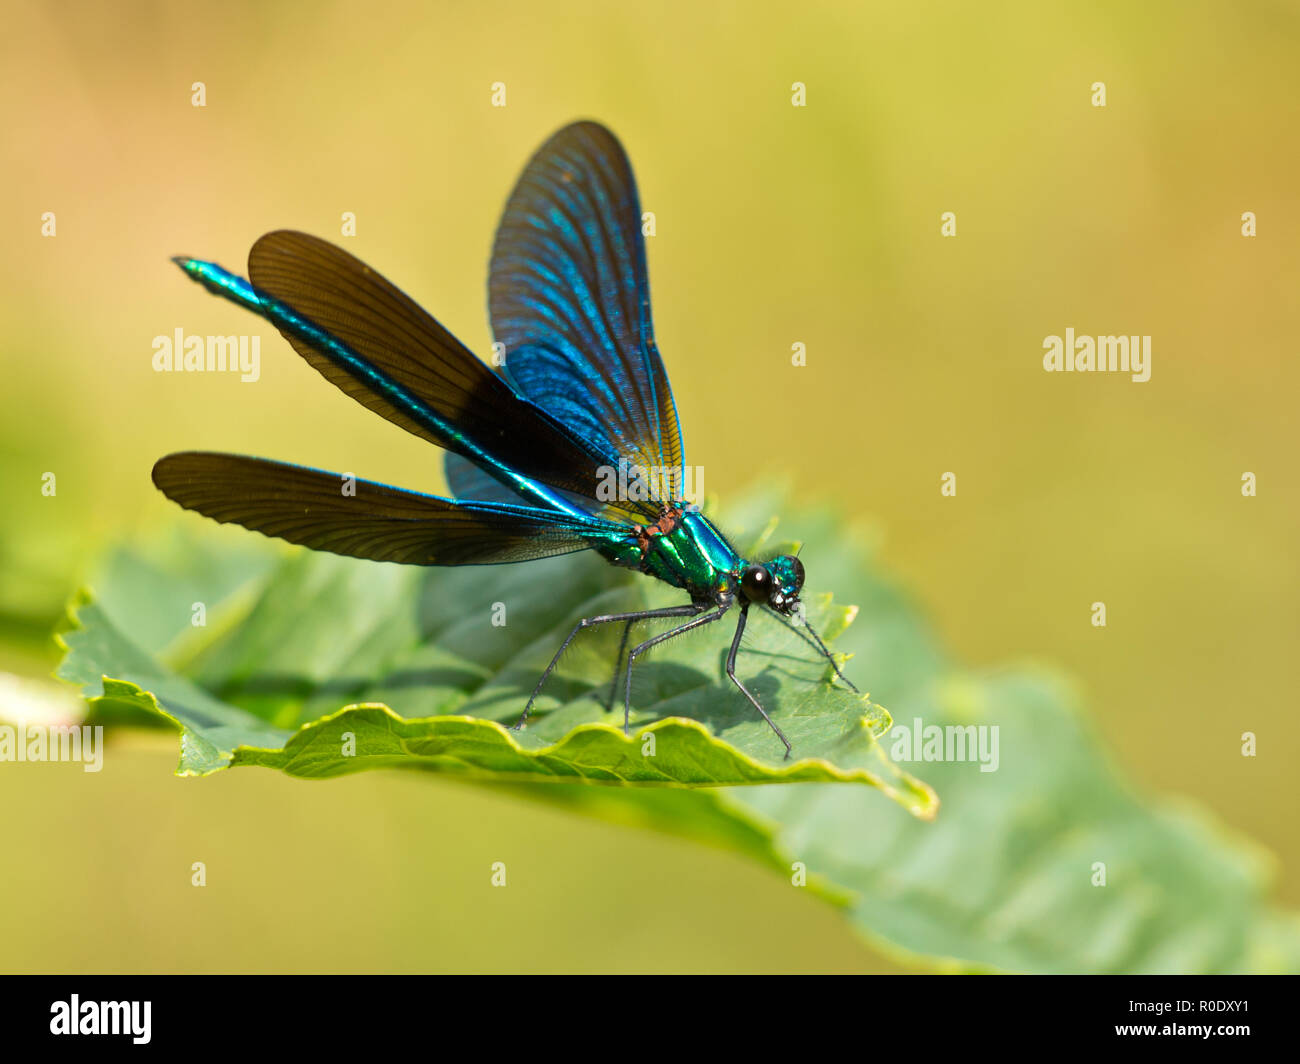 Closeup of a Beautiful Demoiselle Dragonfly (Calopteryx virgo) Male on a Leaf Stock Photo